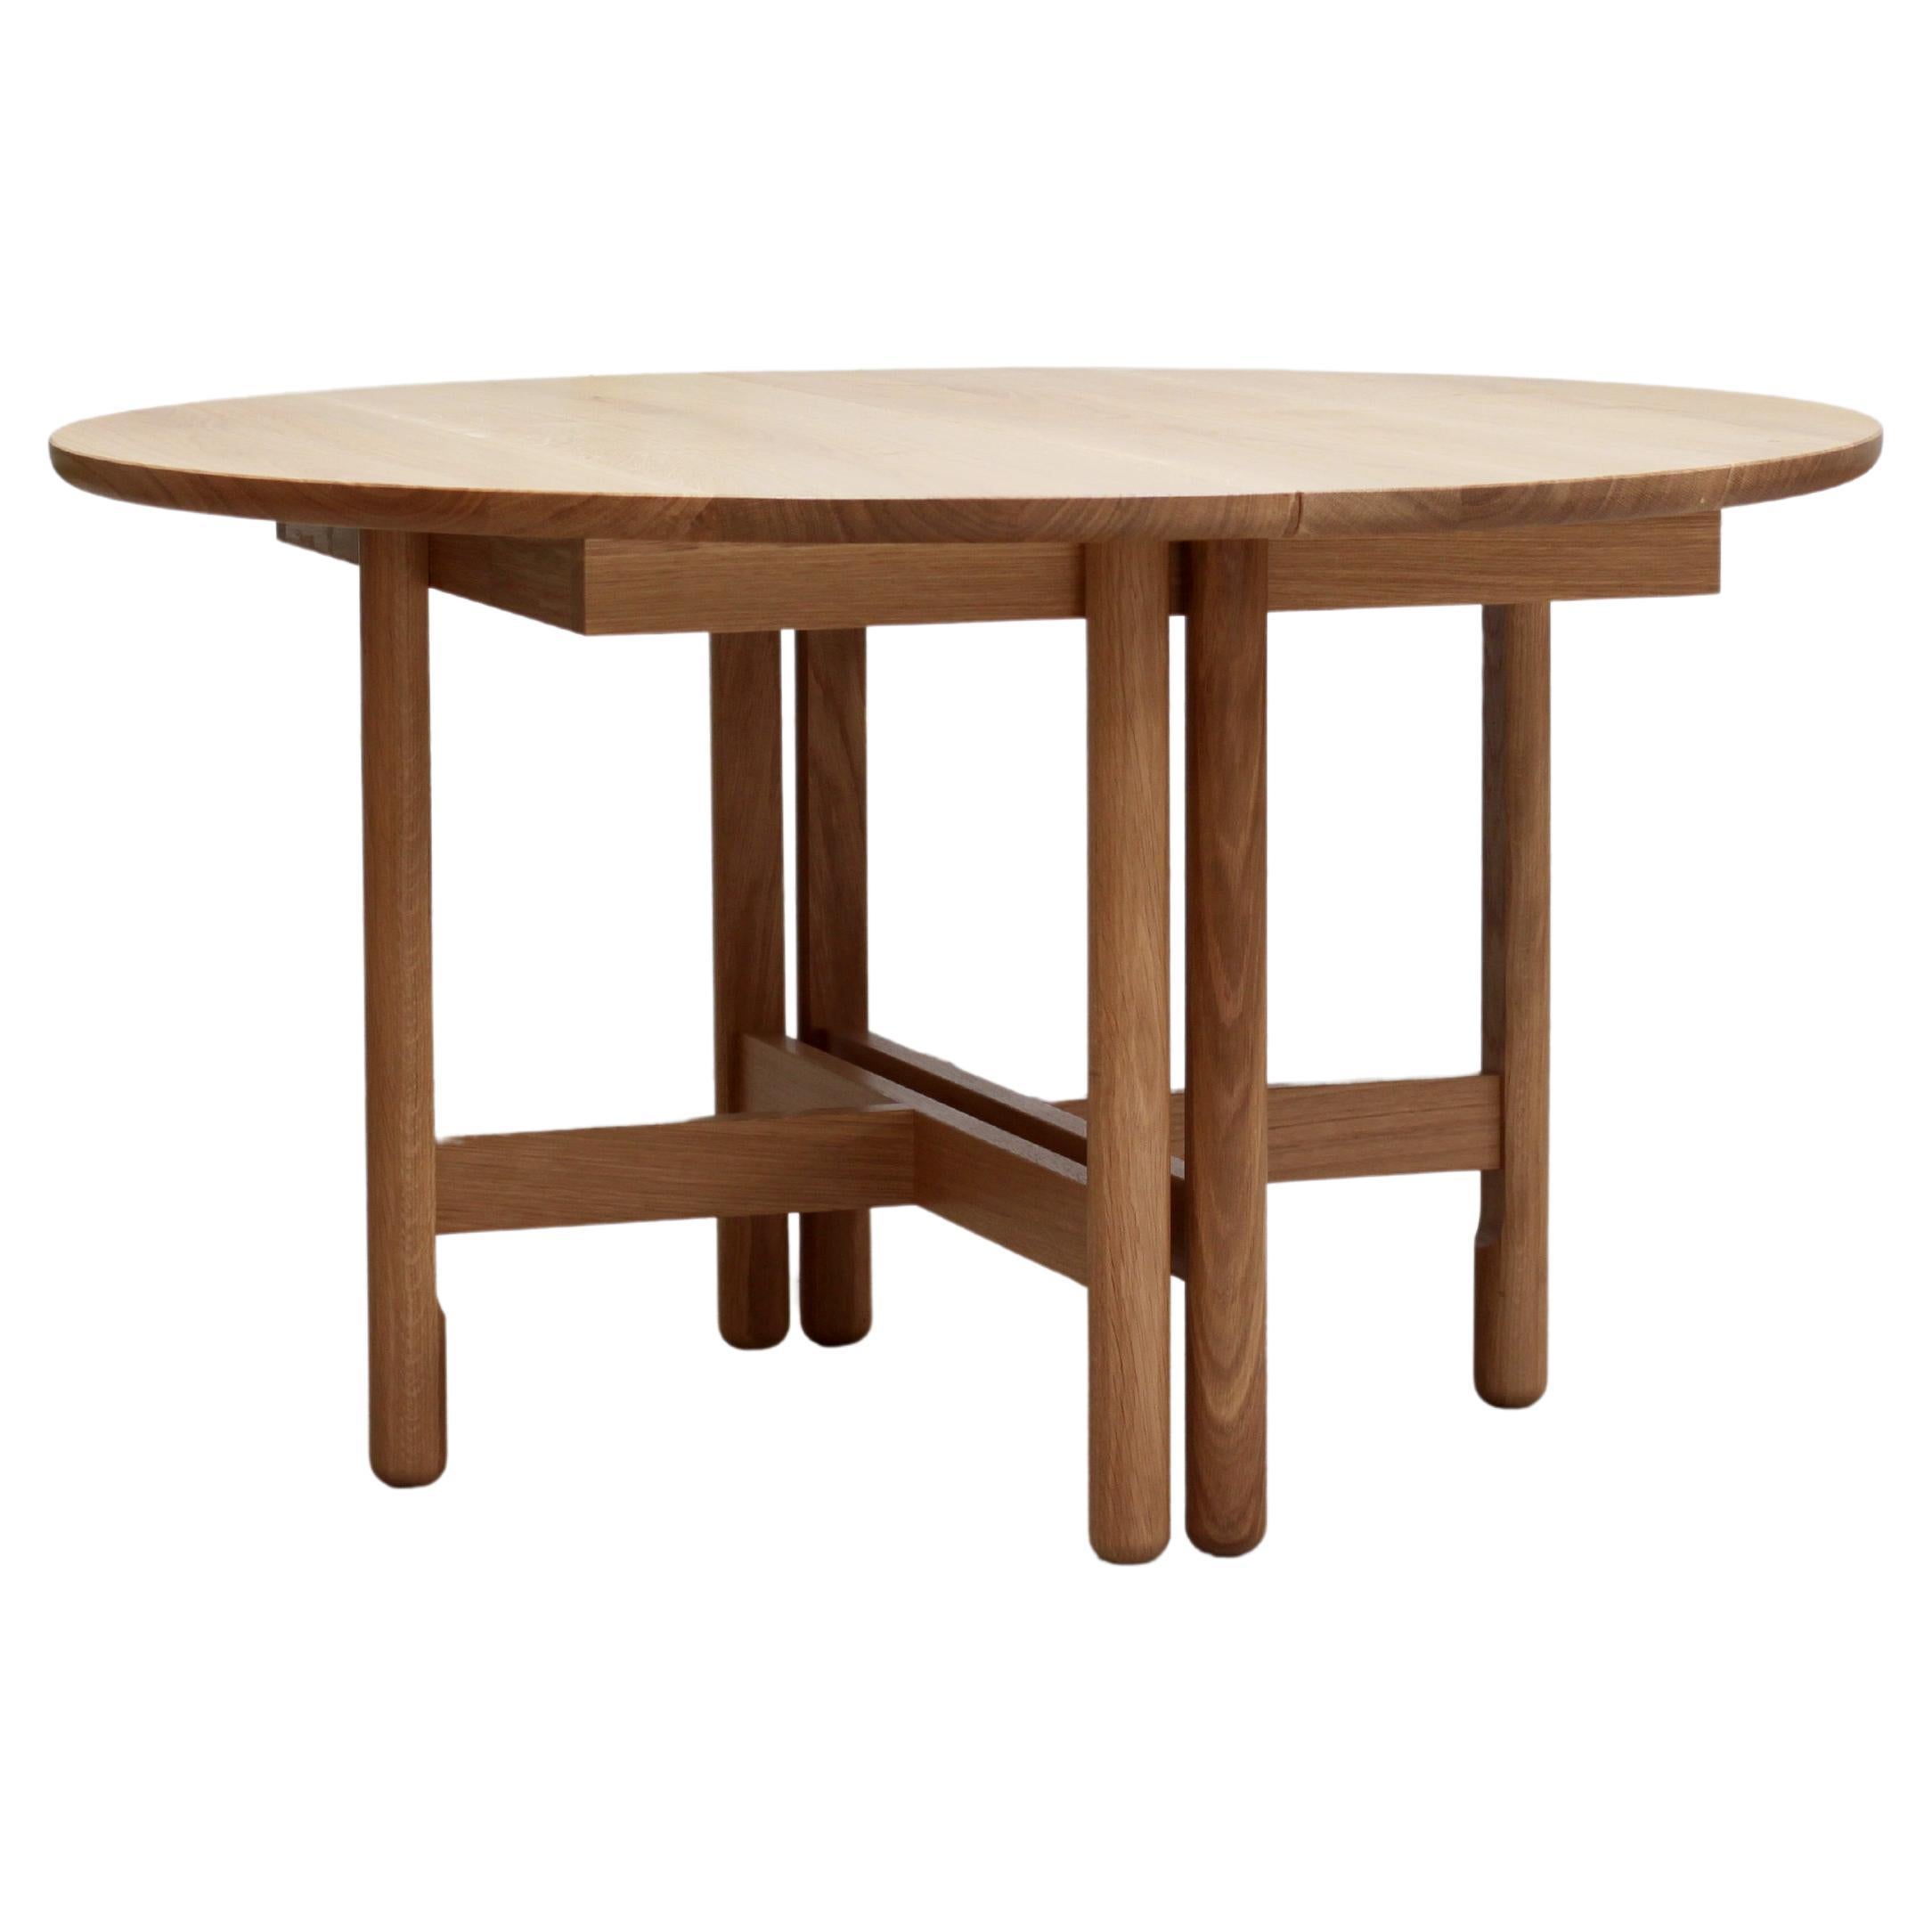 Handmade Thea Dining Table, Extendable Ø130cm - Oak - by BACD studio For Sale